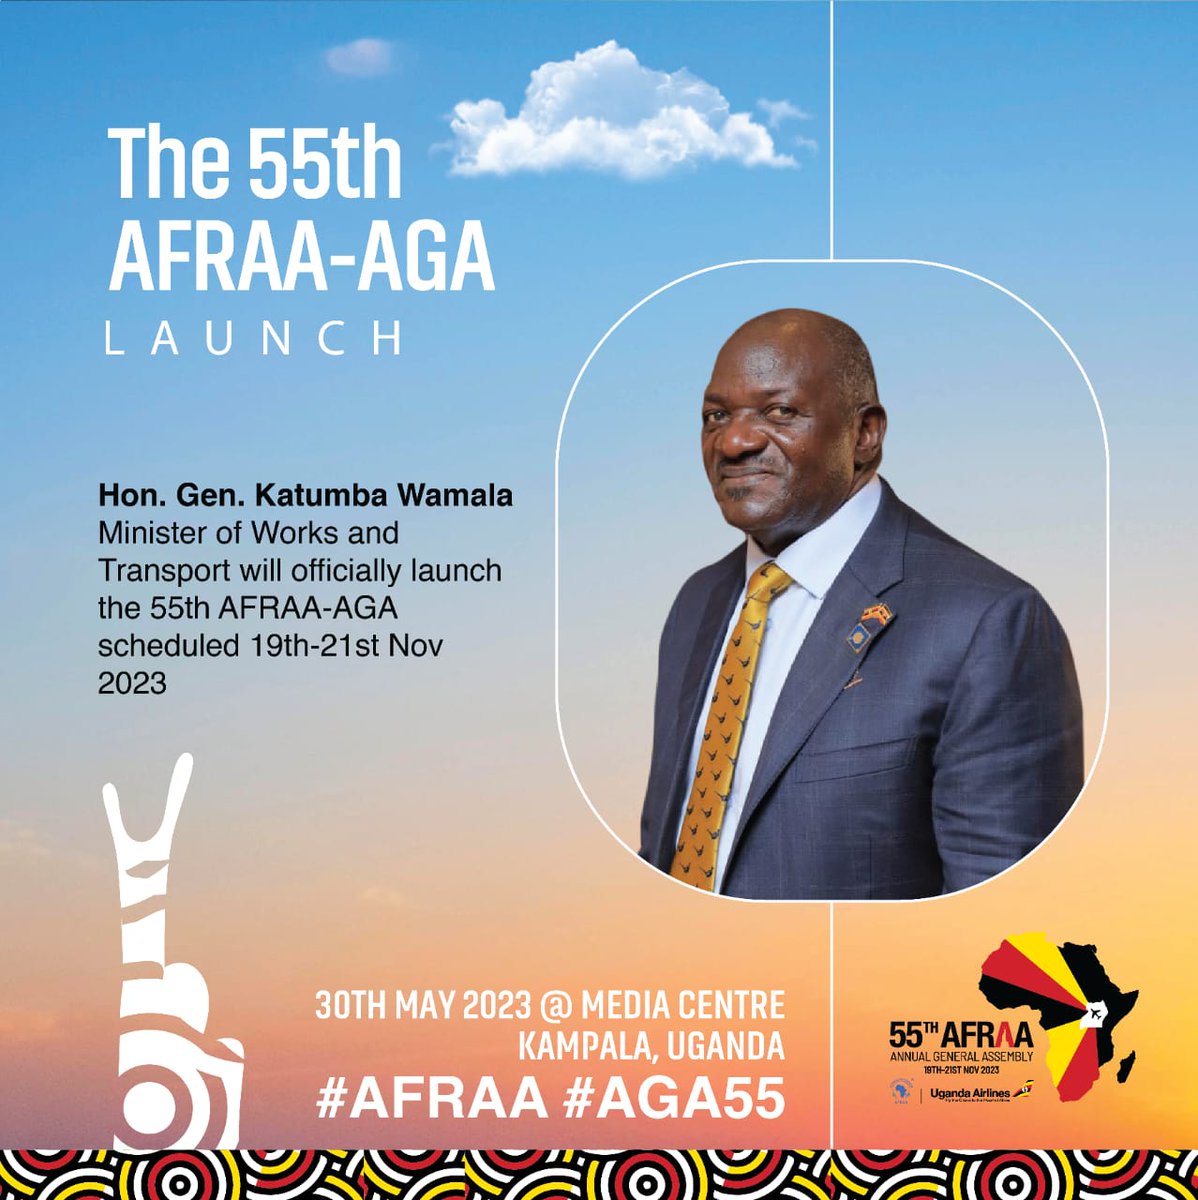 𝐂𝐎𝐌𝐈𝐍𝐆 𝐔𝐏 ✈️: @GenWamala the Minister for @MoWT_Uganda is due to launch the 55th Africa Airlines Association AFRAA, Annual General Assembly | #AFRAA | #55AGA